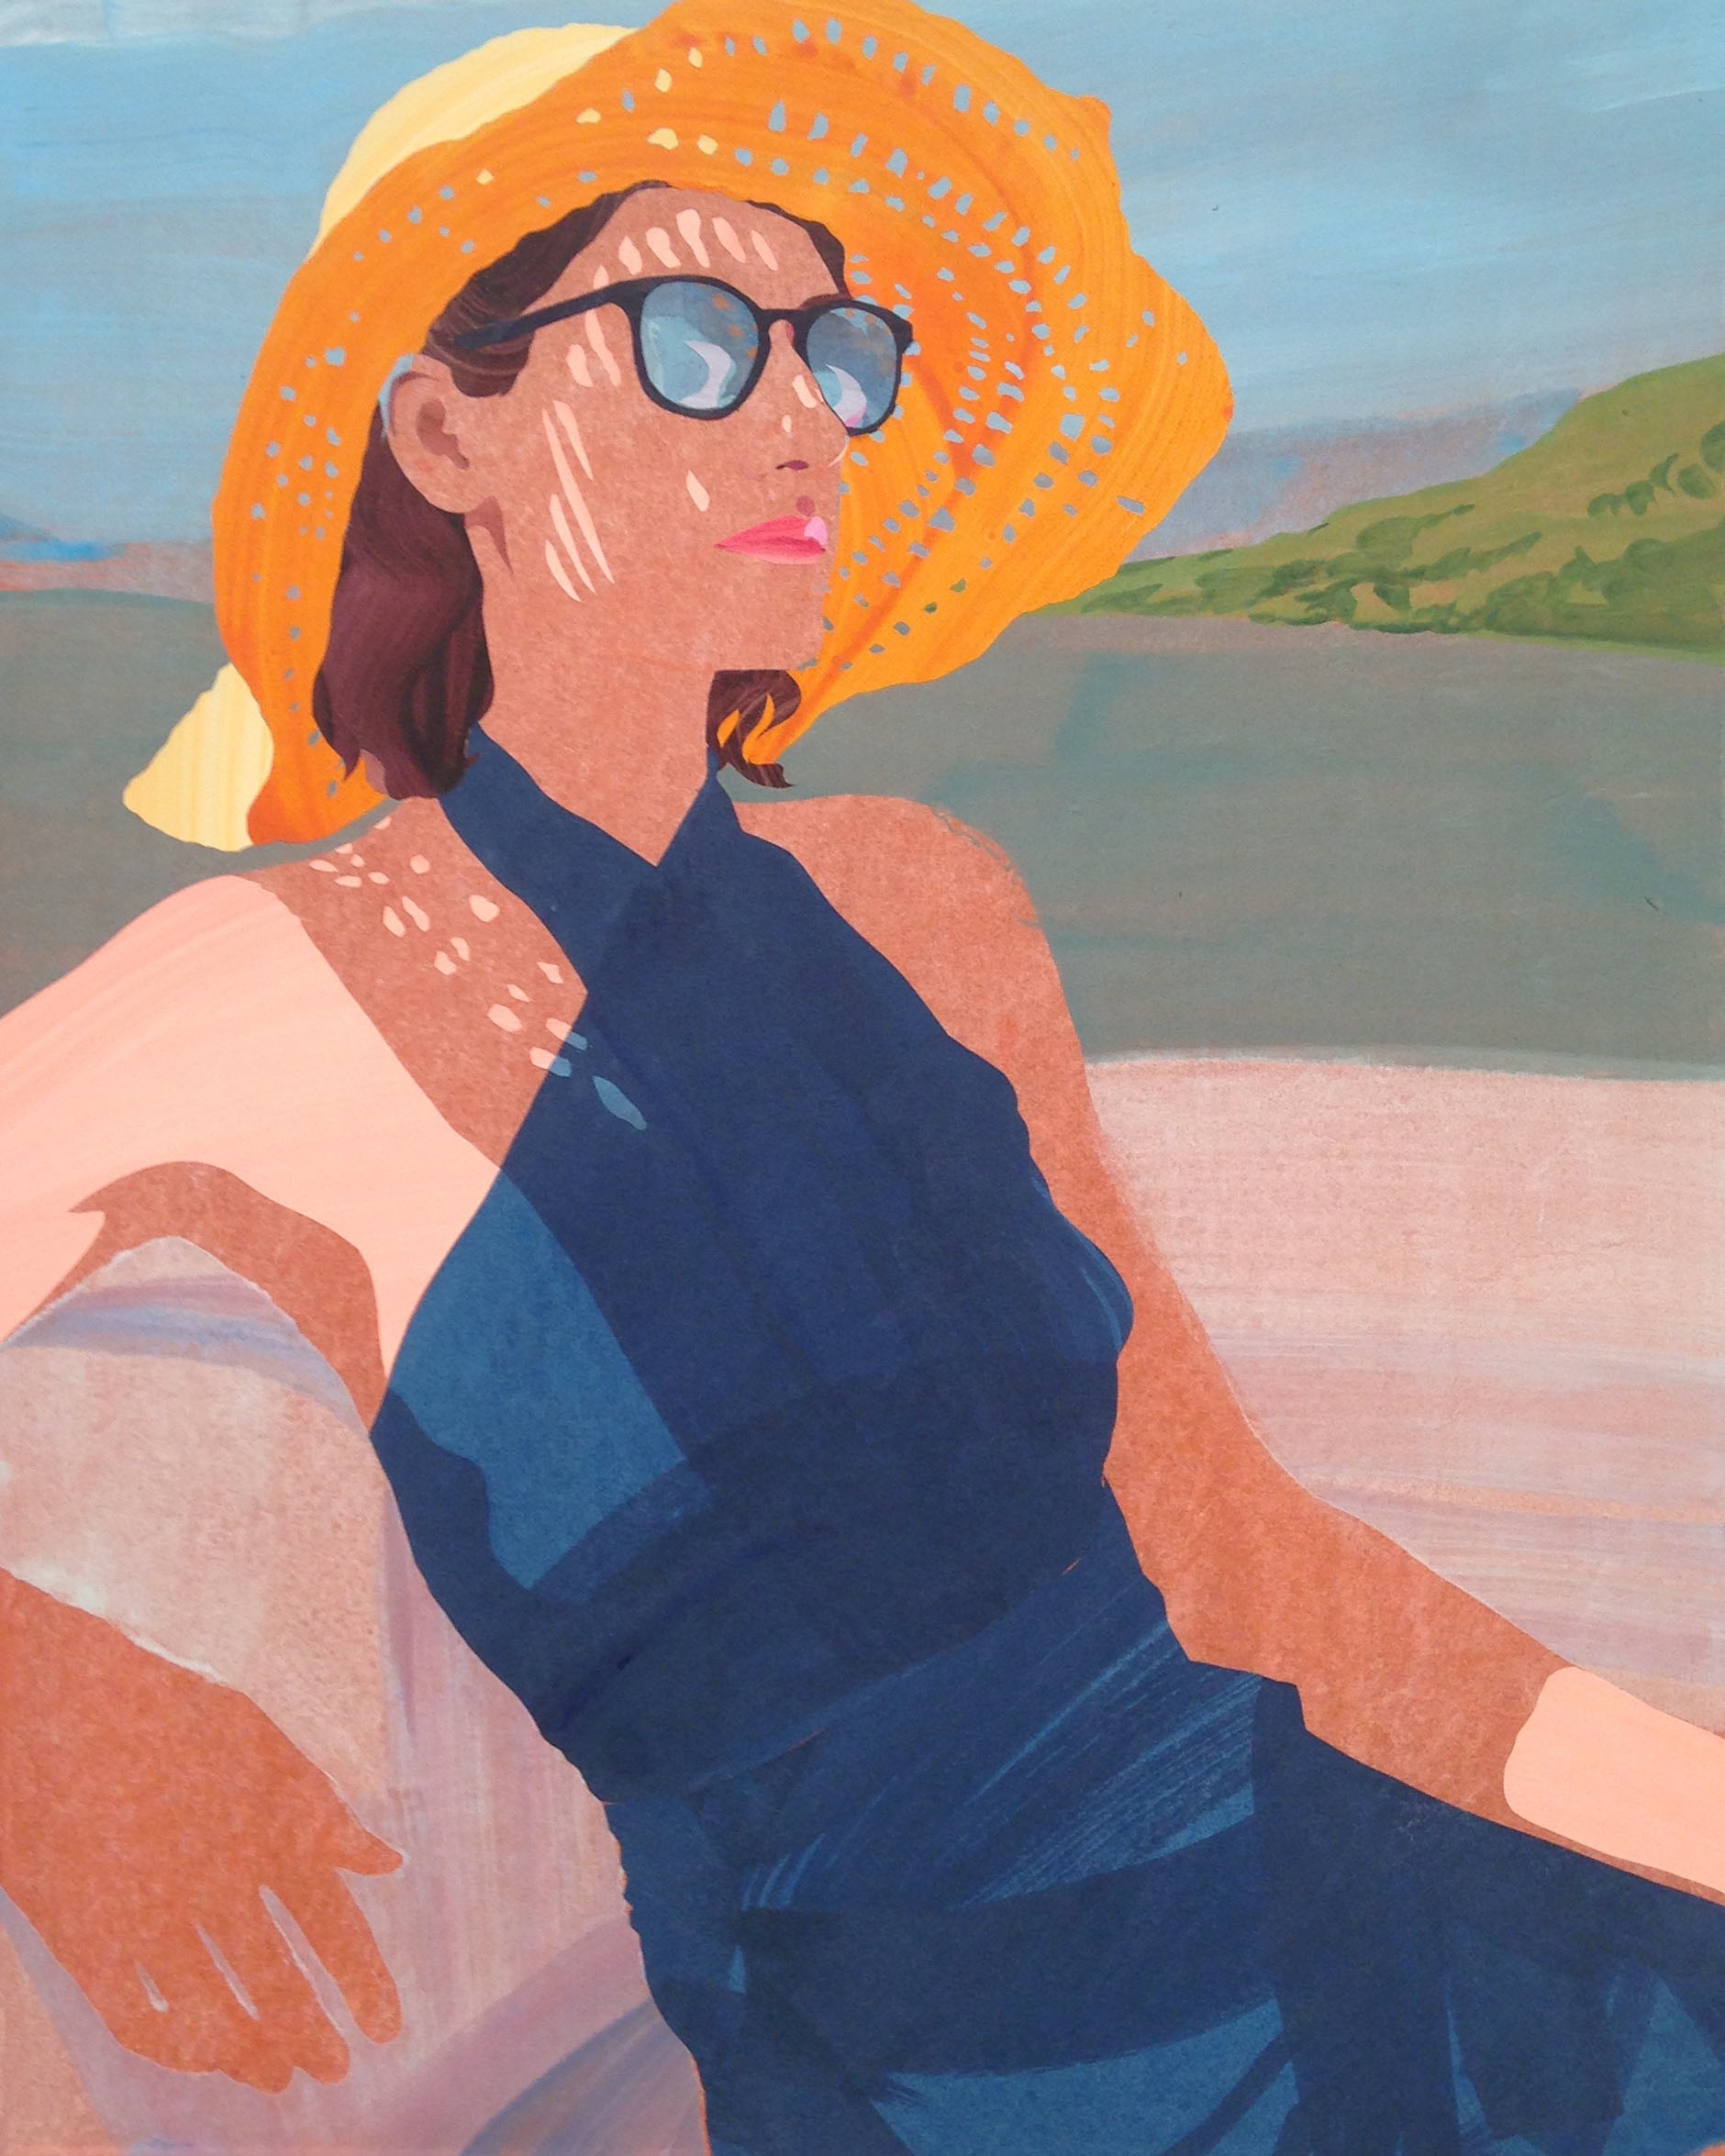    Sebastian Blanck ,  Isca in Her Sun Hat  (2015). 16 x 20 inches. Watercolor and collage on stretched paper.  